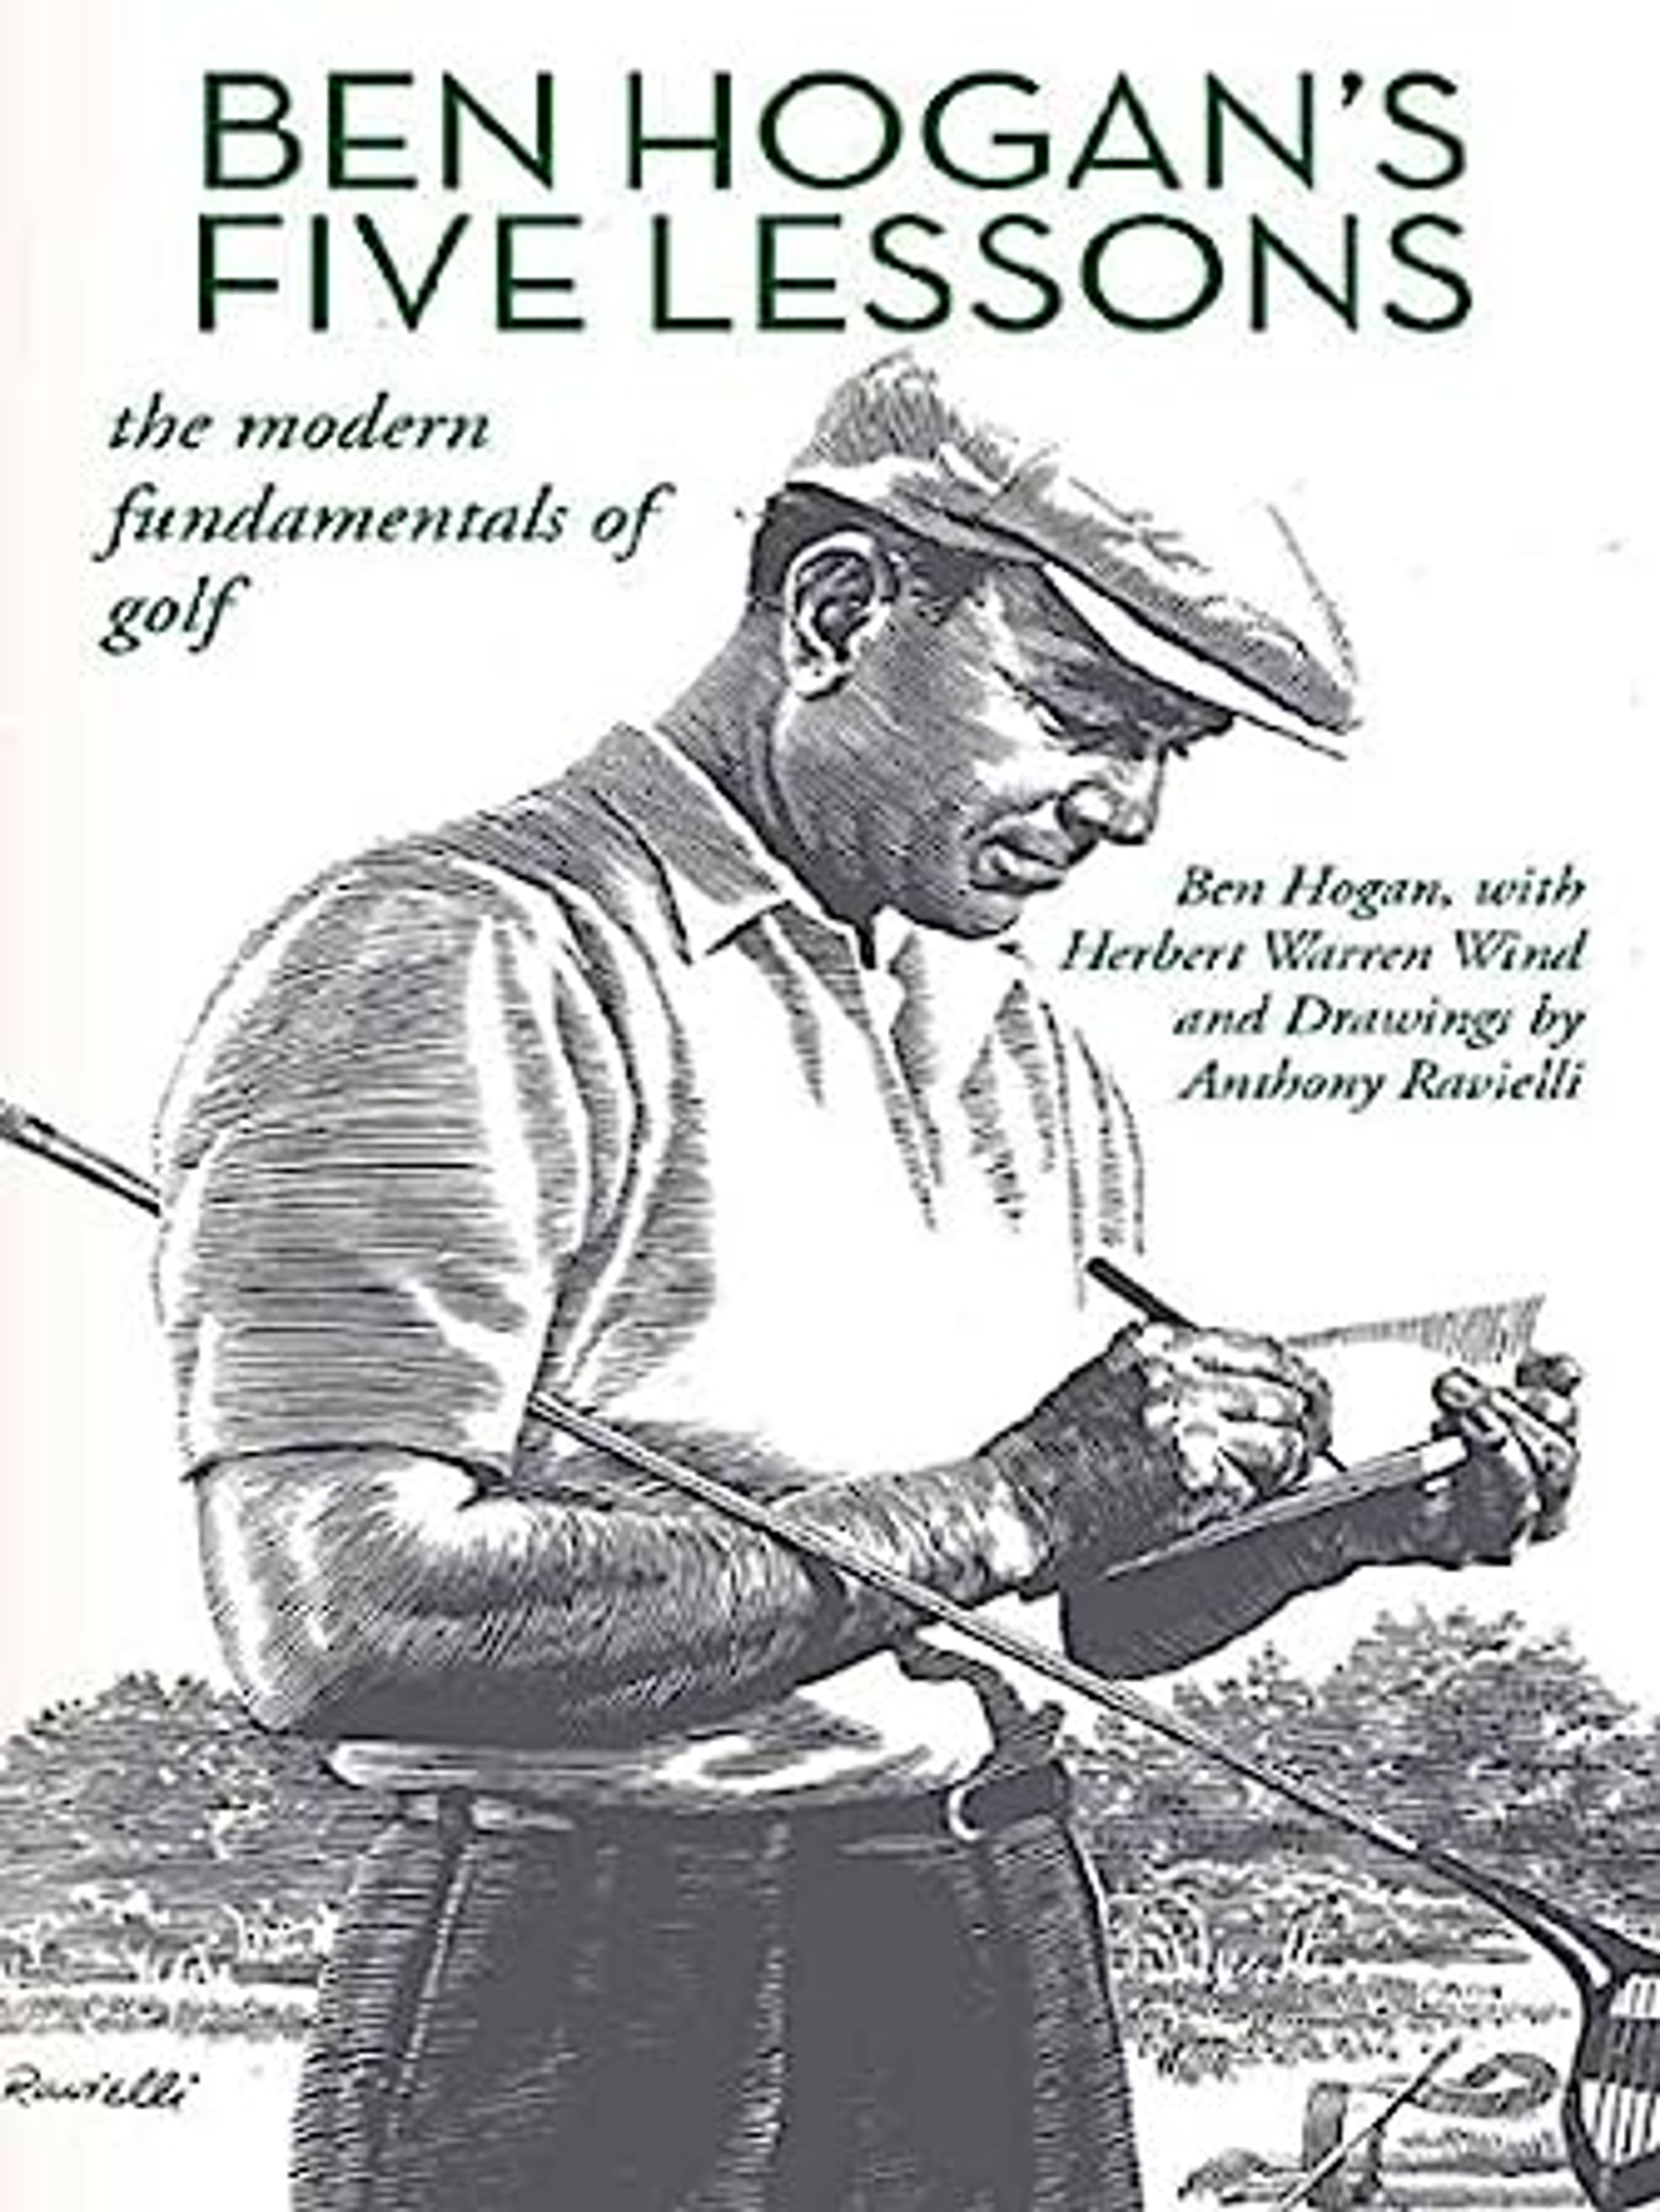 Ben Hogans Five Lessons: The Modern Fundamentals of Golf product image